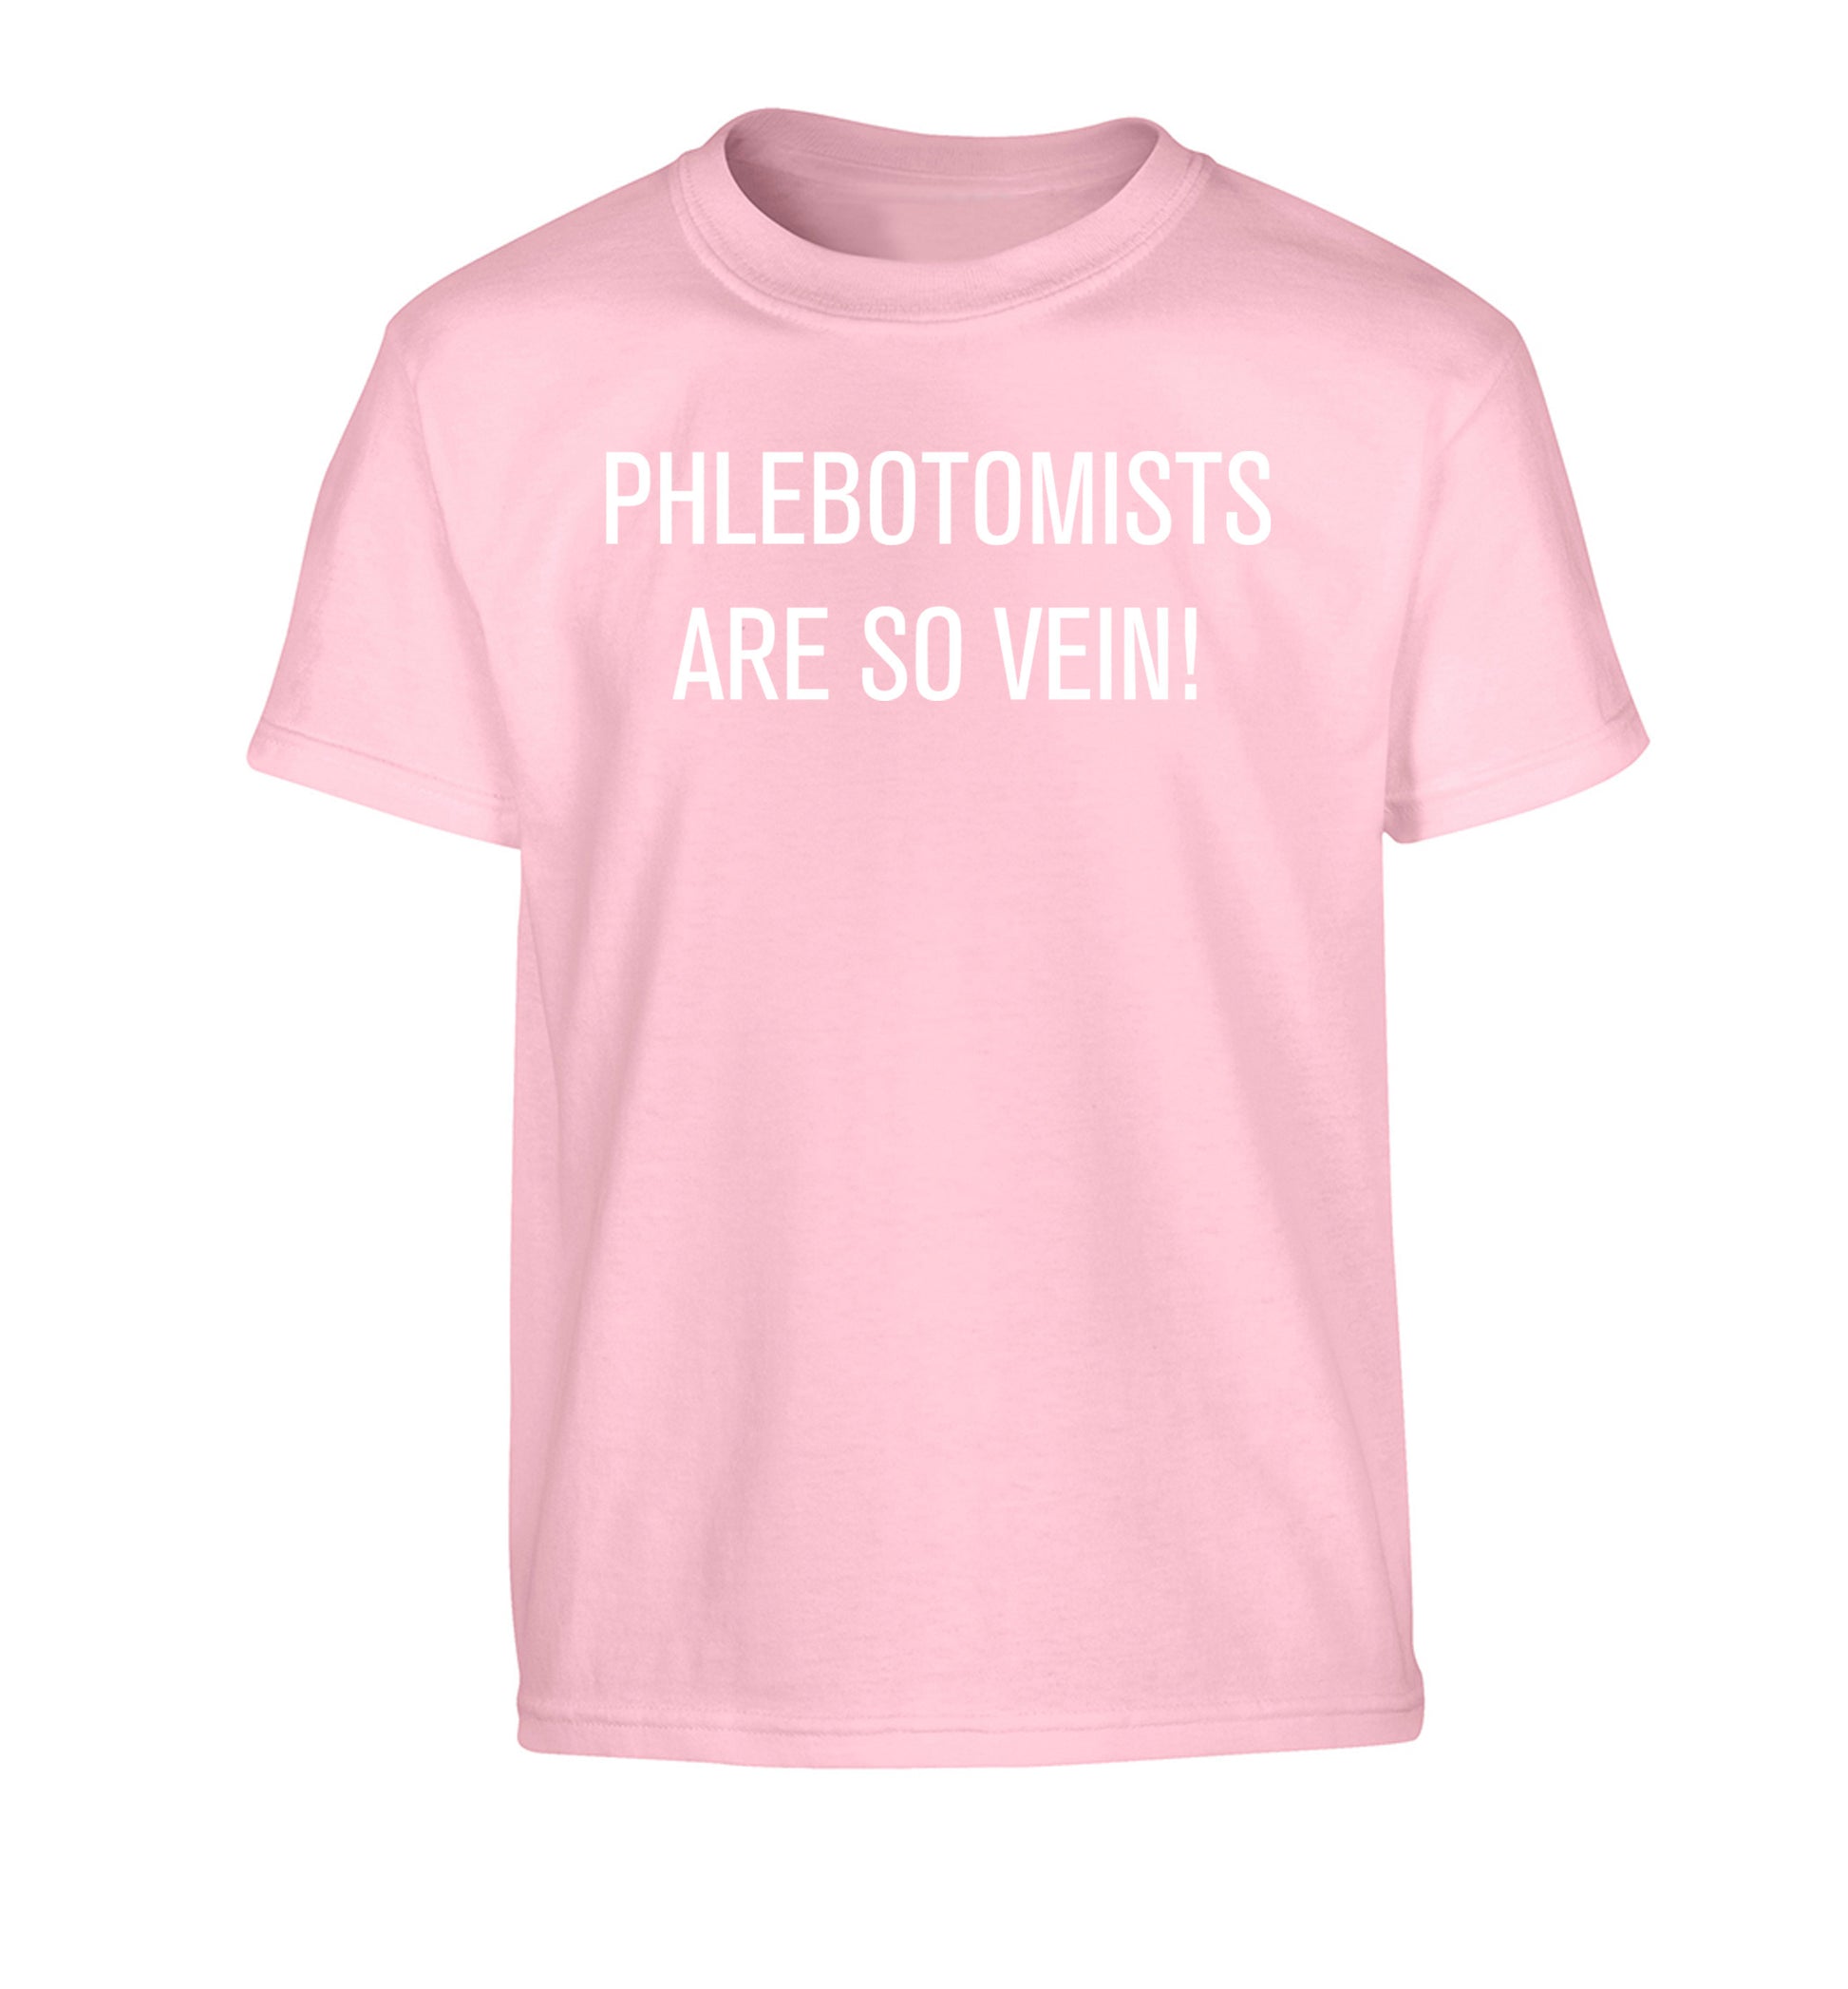 Phlebotomists are so vein! Children's light pink Tshirt 12-14 Years